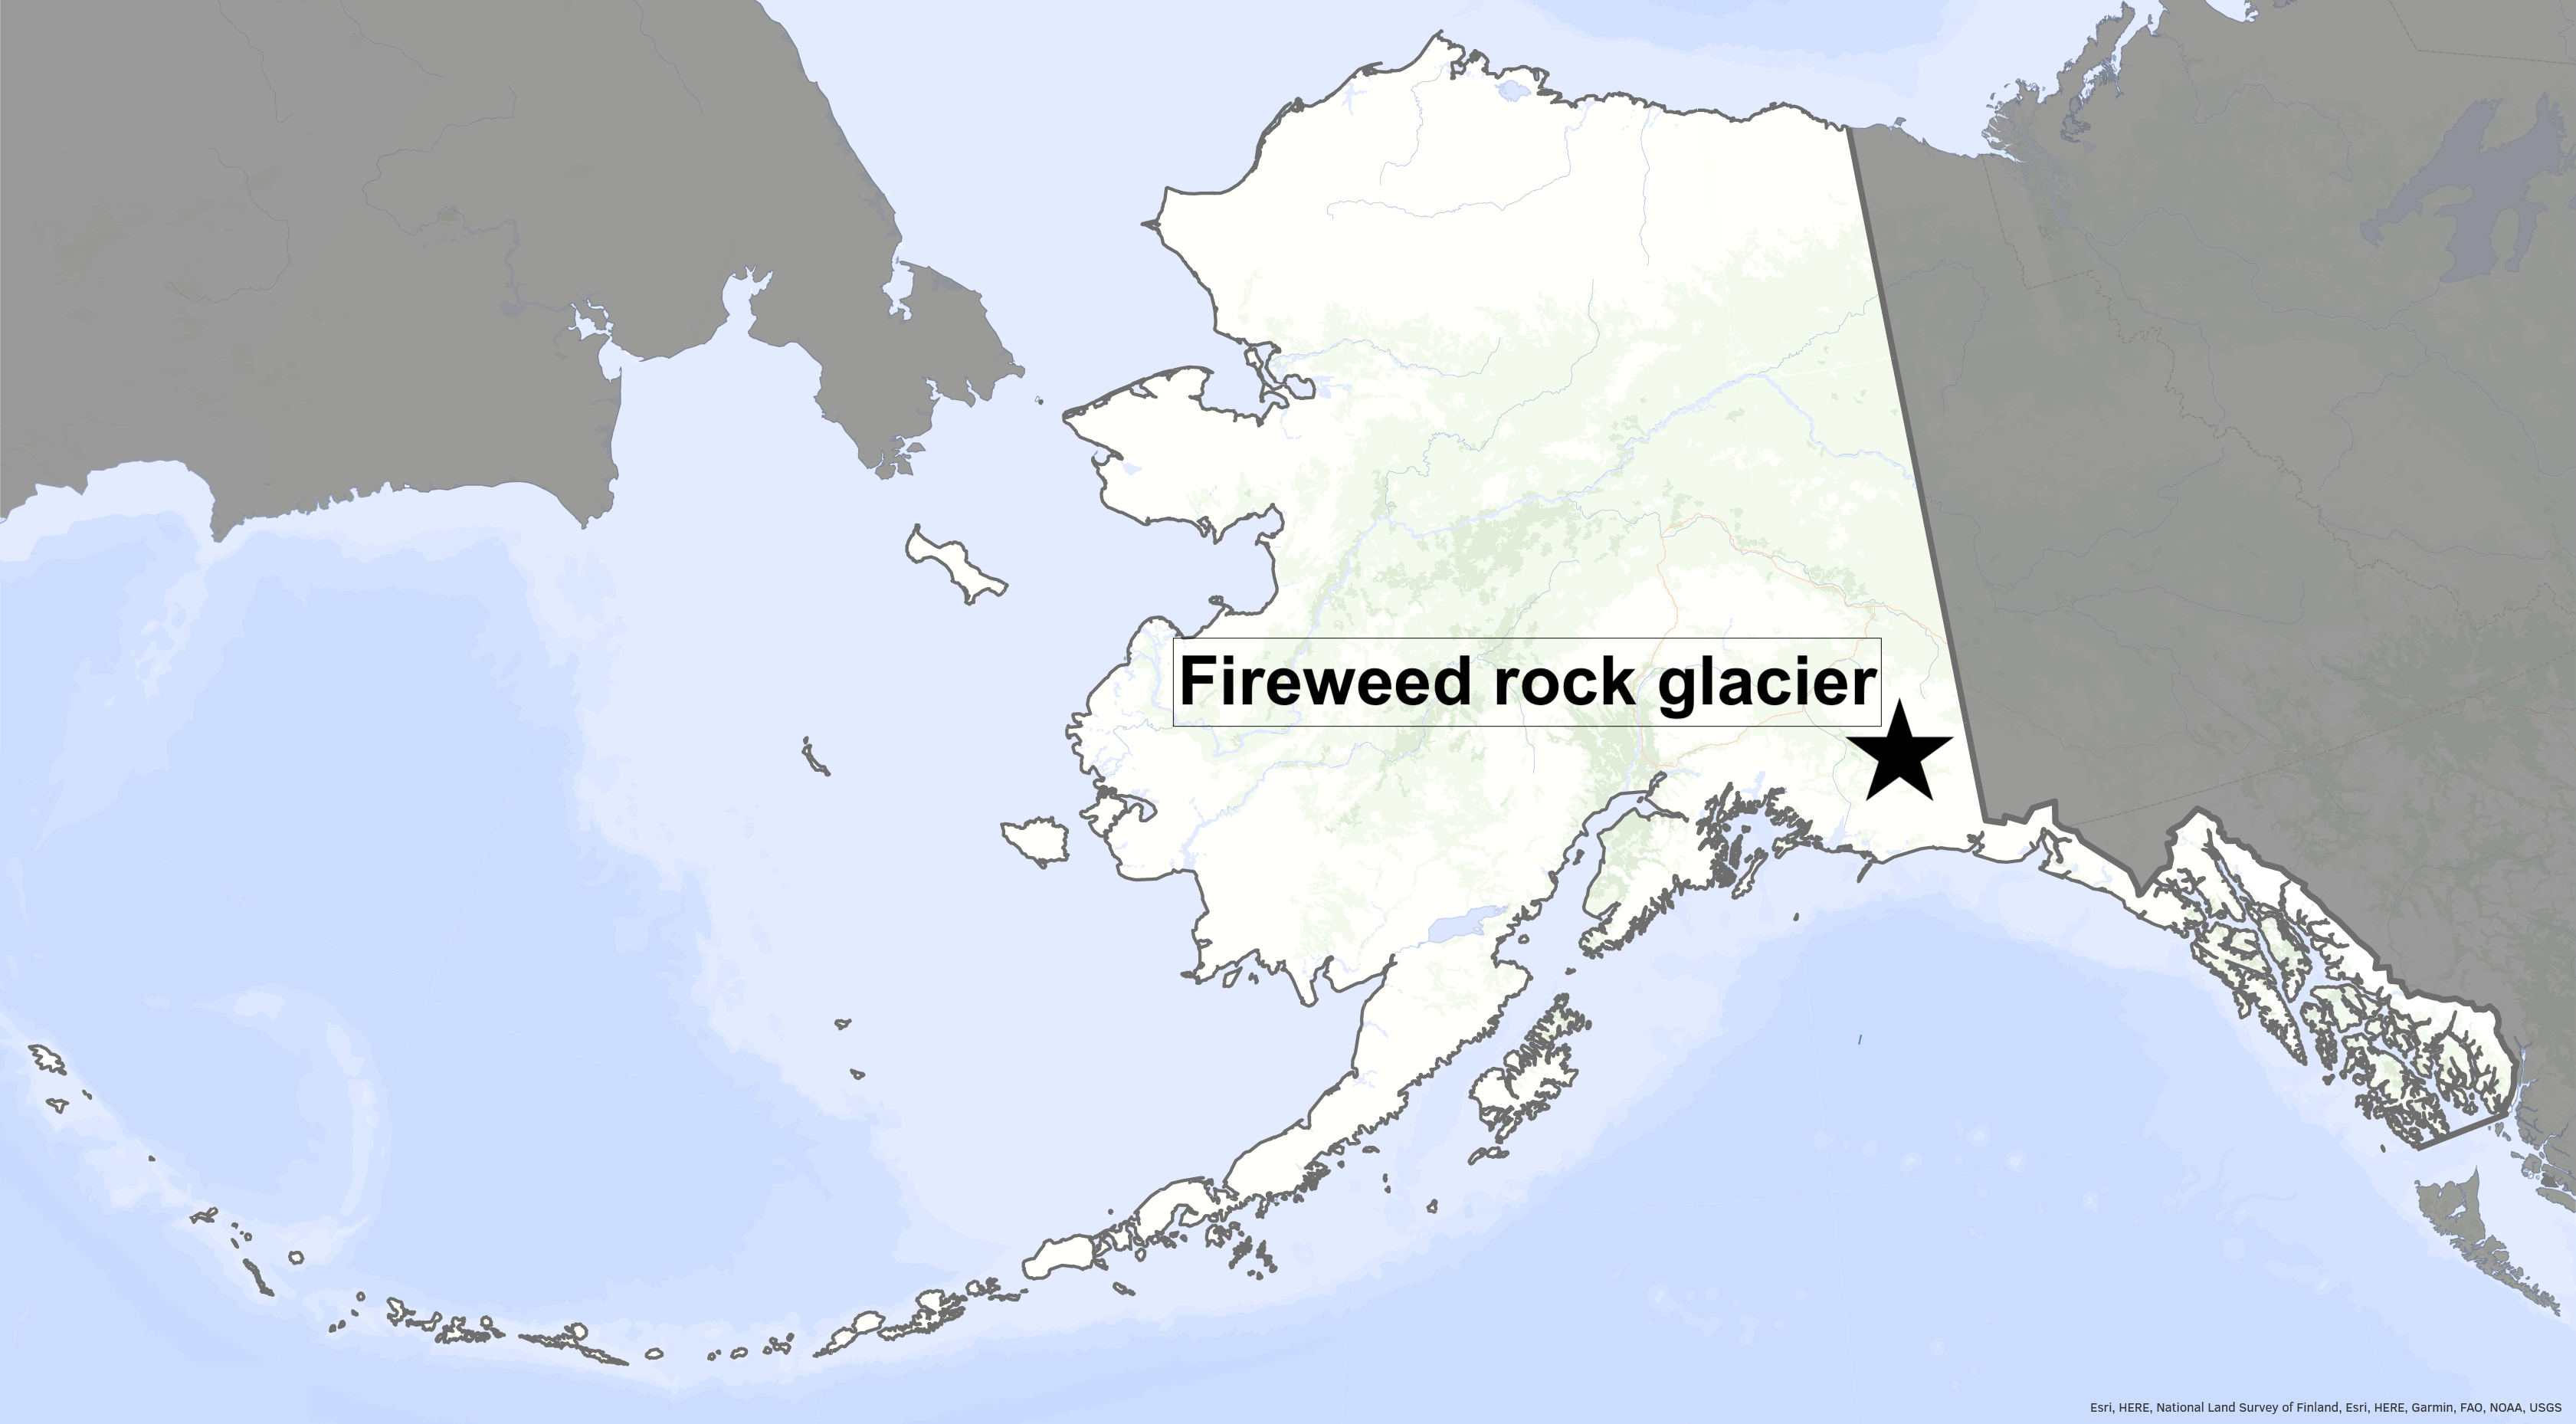 map of Alaska with a star showing the location of Fireweed rock glacier near McCarthy in the southeast corner of the state